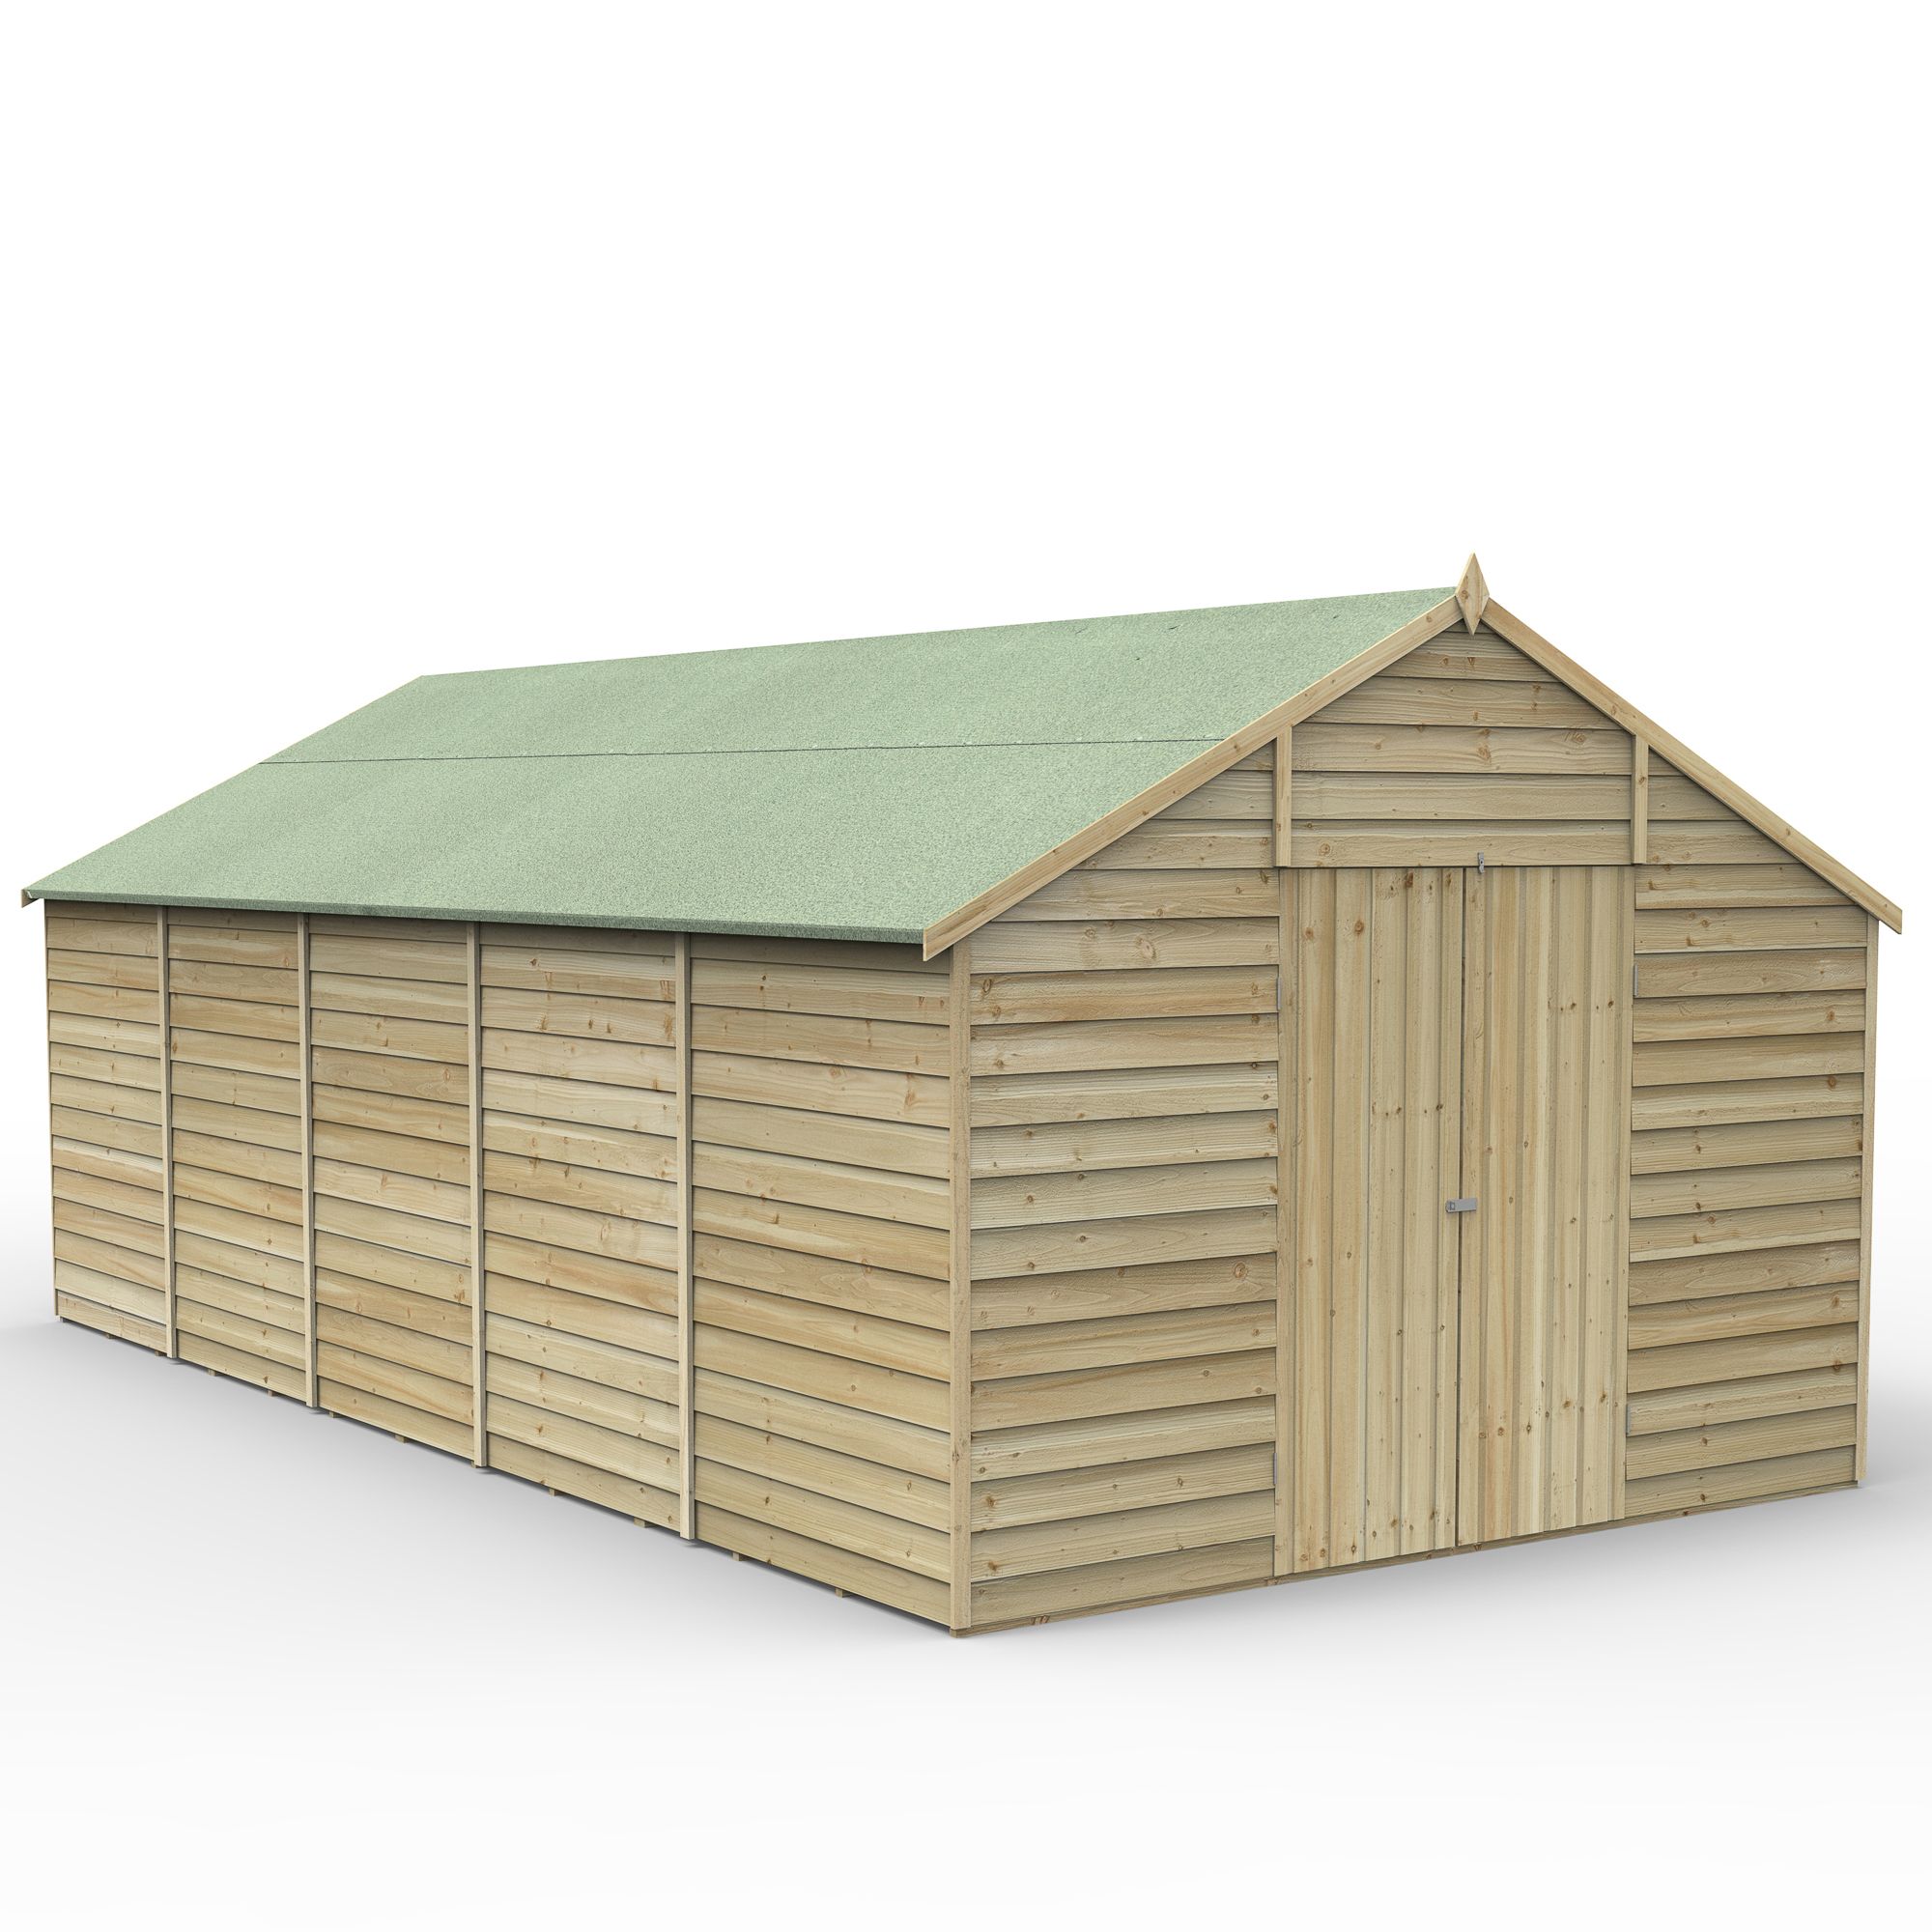 Forest Garden 20x10 ft Apex Wooden 2 door Shed with floor (Base included)